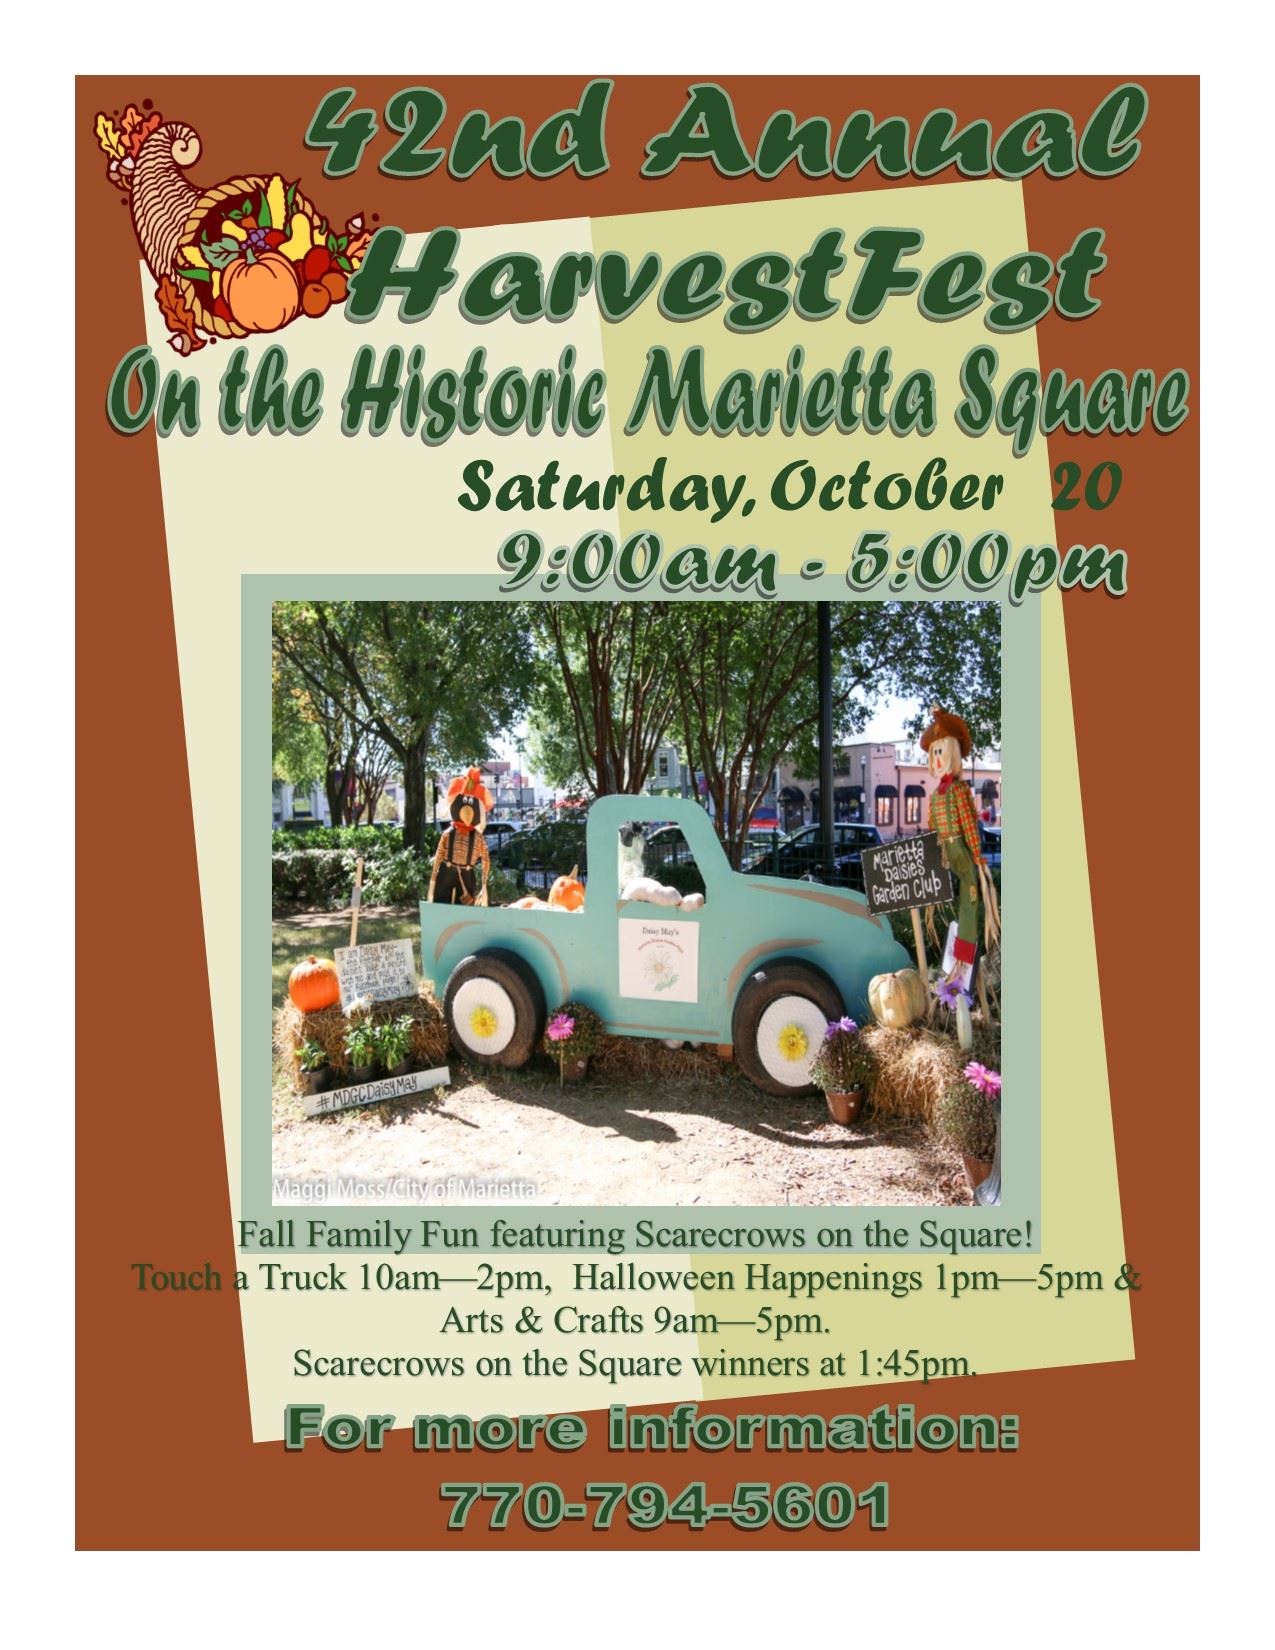 HARVESTFEST, HALLOWEEN HAPPENINGS & SCARECROWS IN THE SQUARE